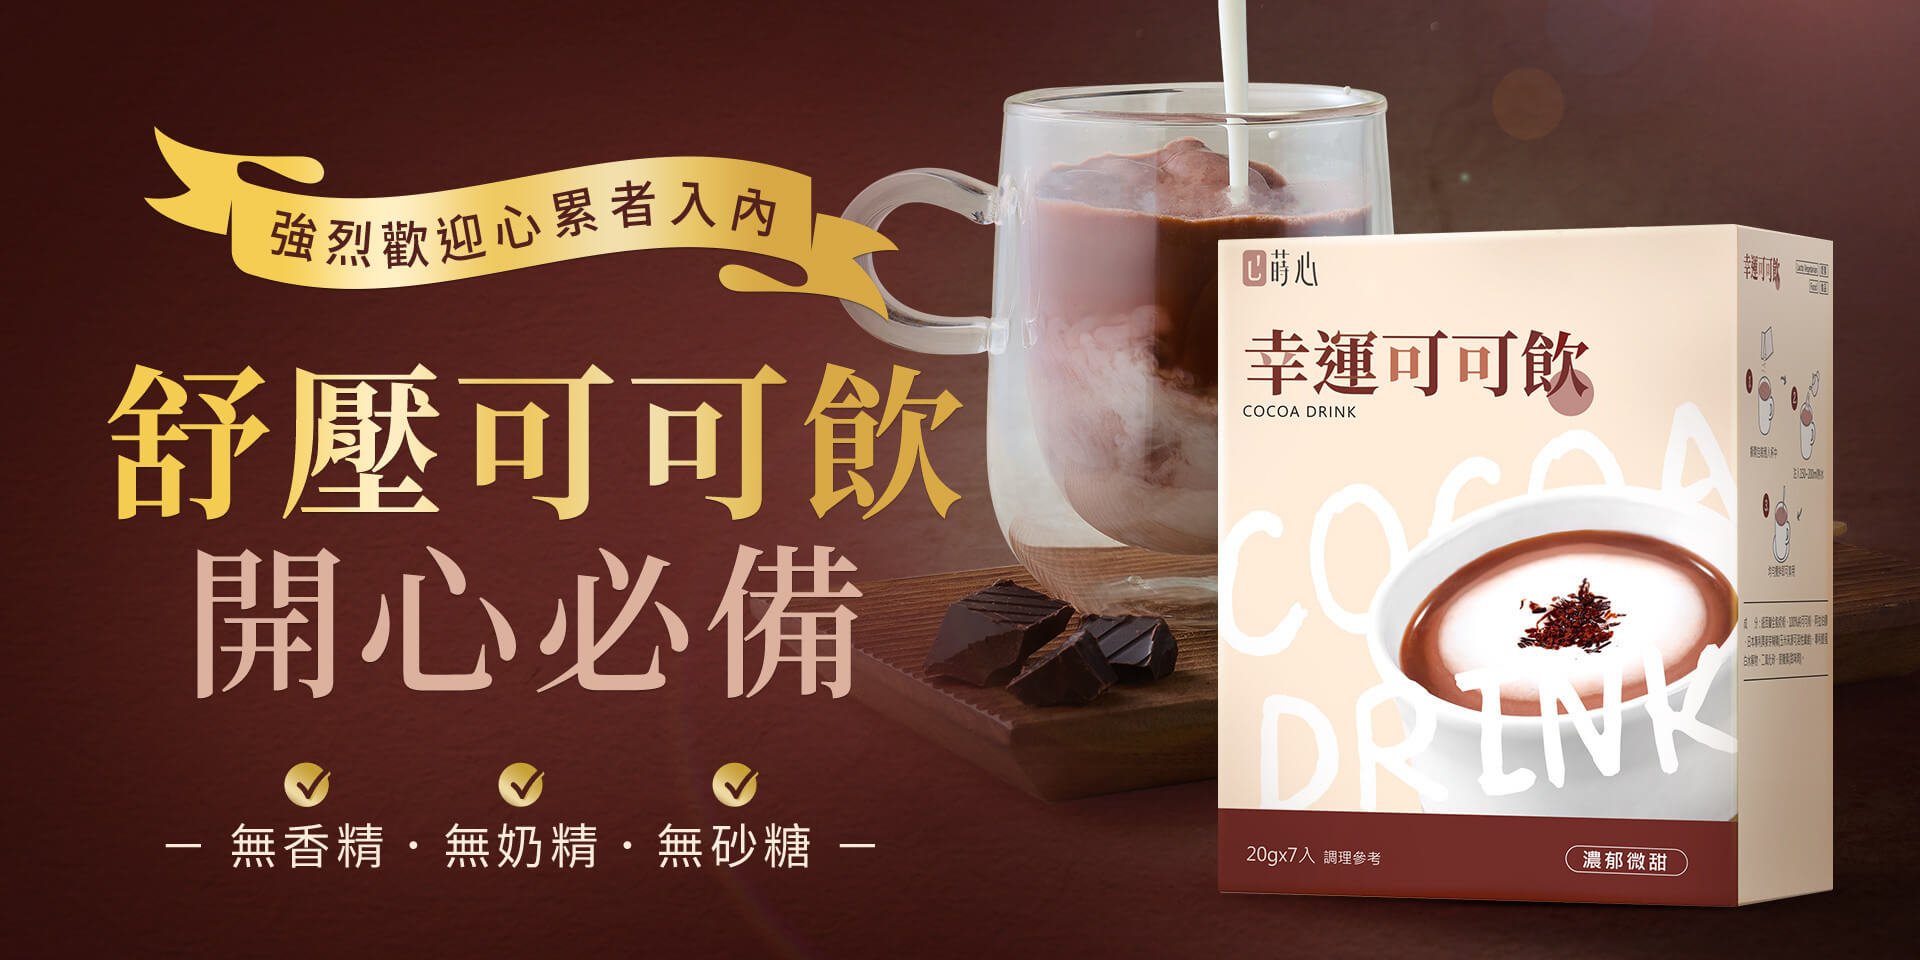 Low-Cal Health - BHK's Official Website︱Taiwan NO.1 Health Foods